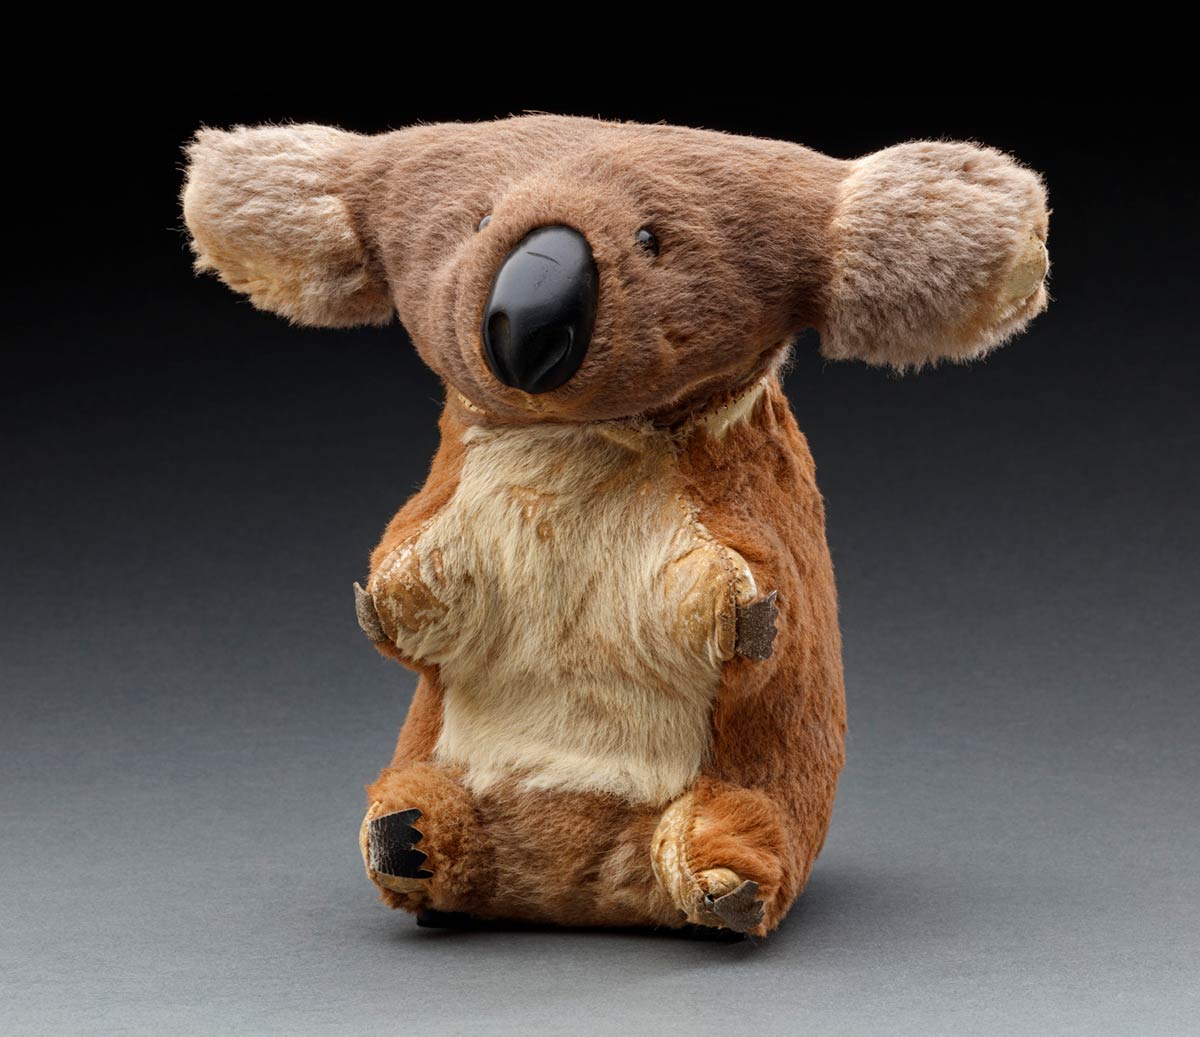 A toy koala made of grey and brown kangaroo fur. It has small black plastic eyes, and black leather for the nose and claws. There are a number of areas across the toy where the fur is missing. - click to view larger image